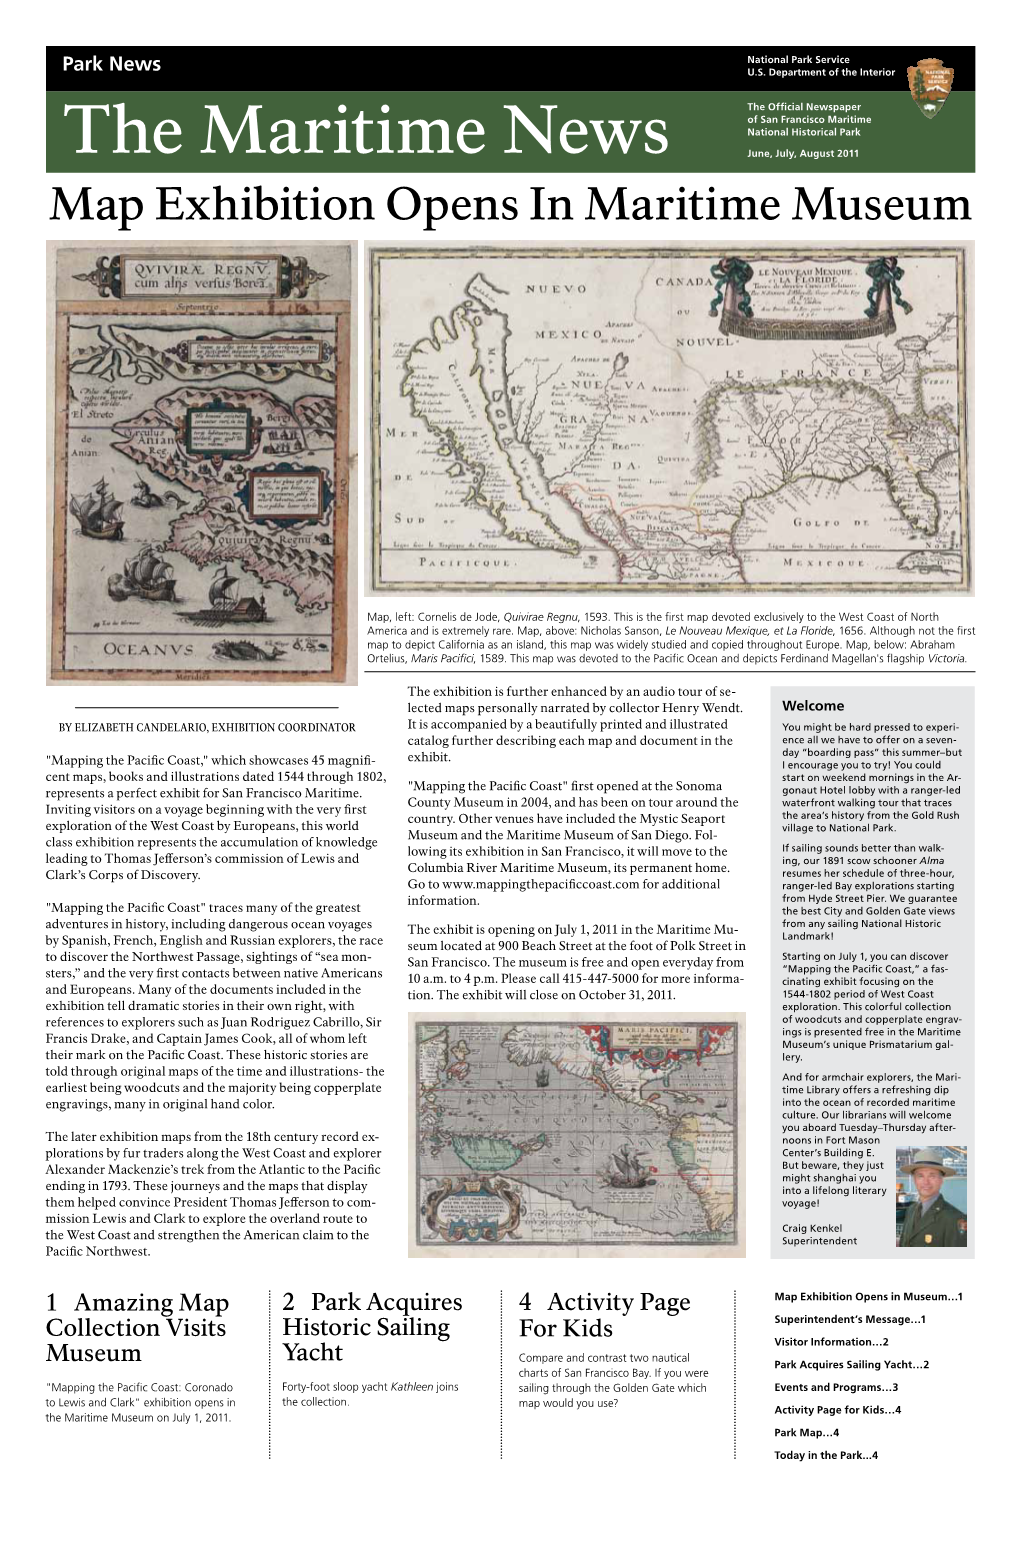 The Maritime News June, July, August 2011 Map Exhibition Opens in Maritime Museum